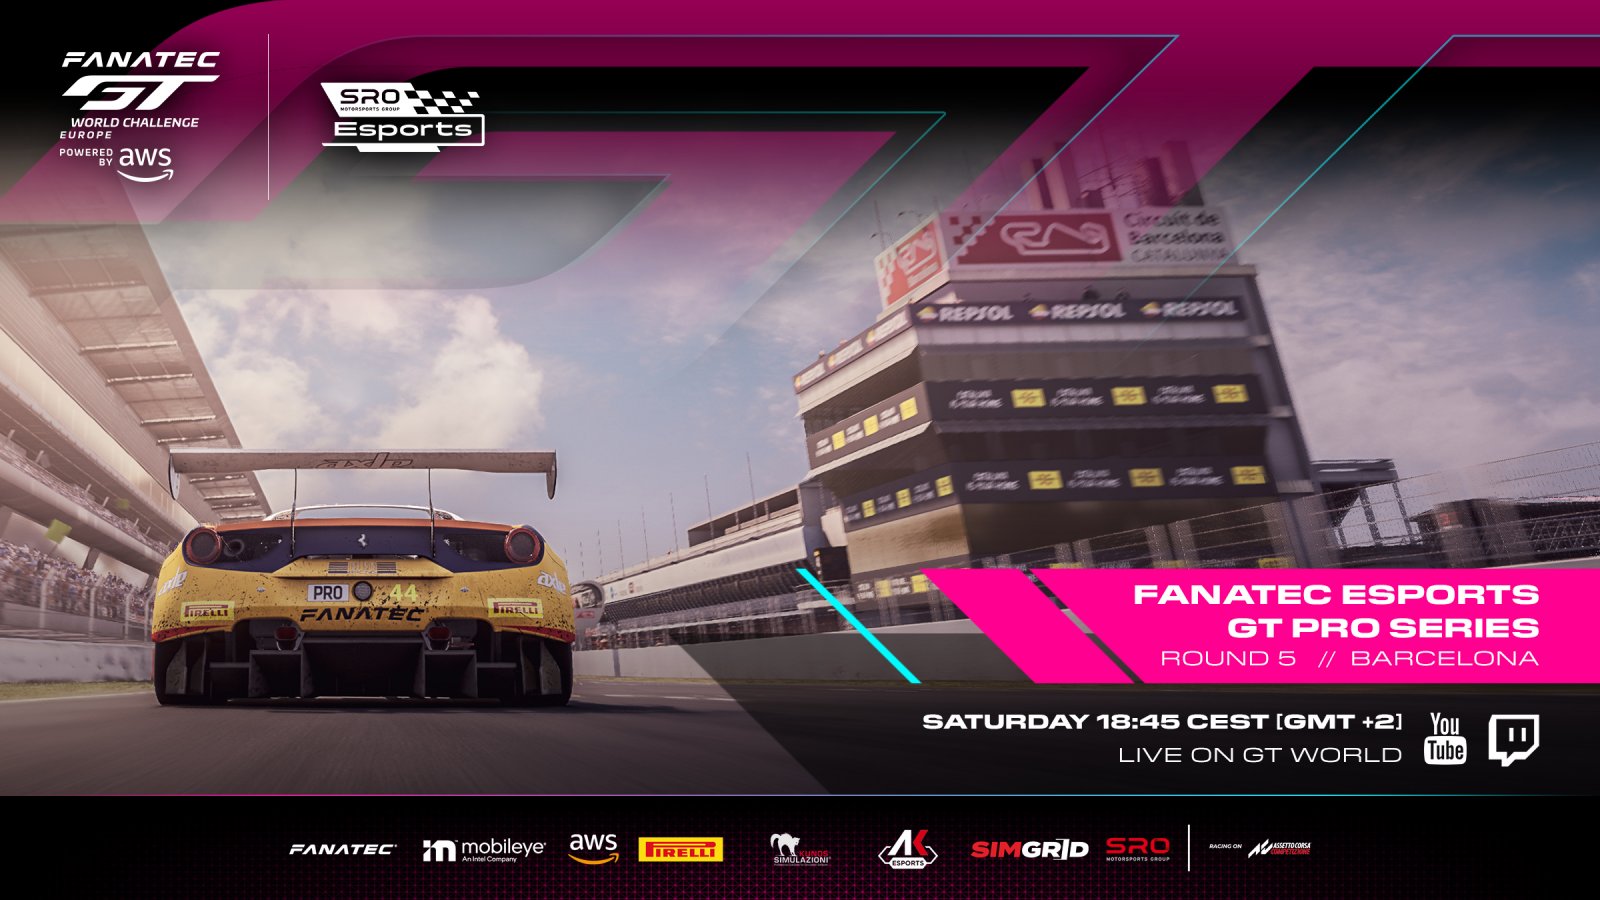 Fanatec Esports GT Pro Series titles to be decided at Barcelona